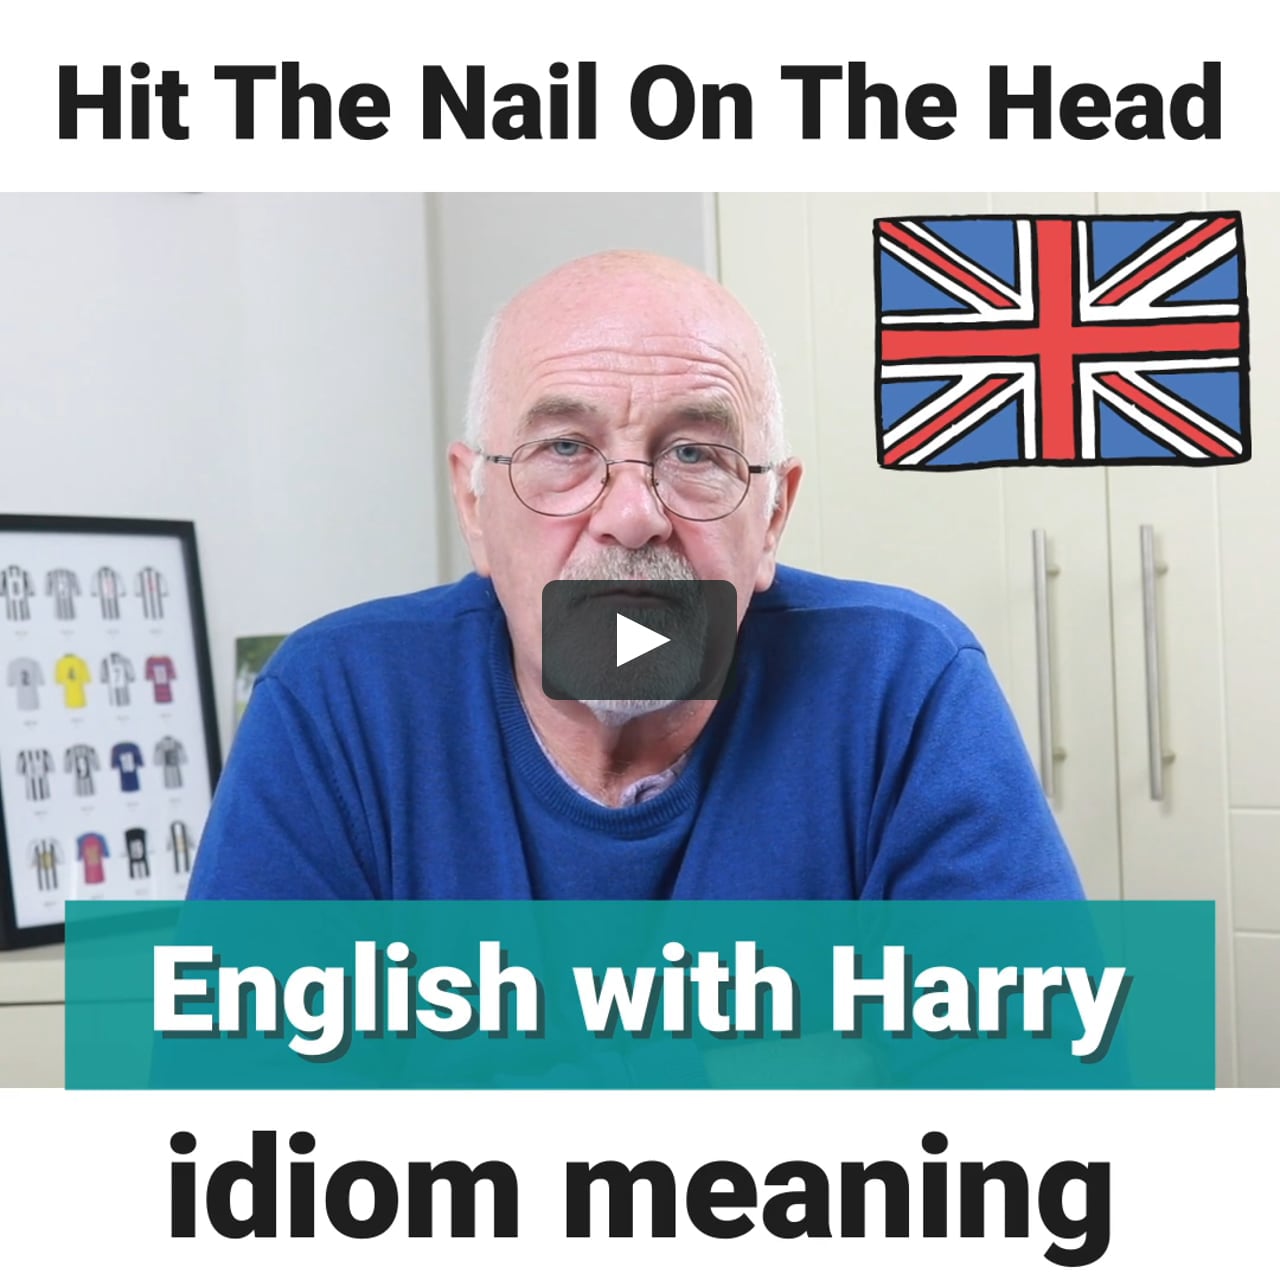 Hit the nail on the head idiom meaning